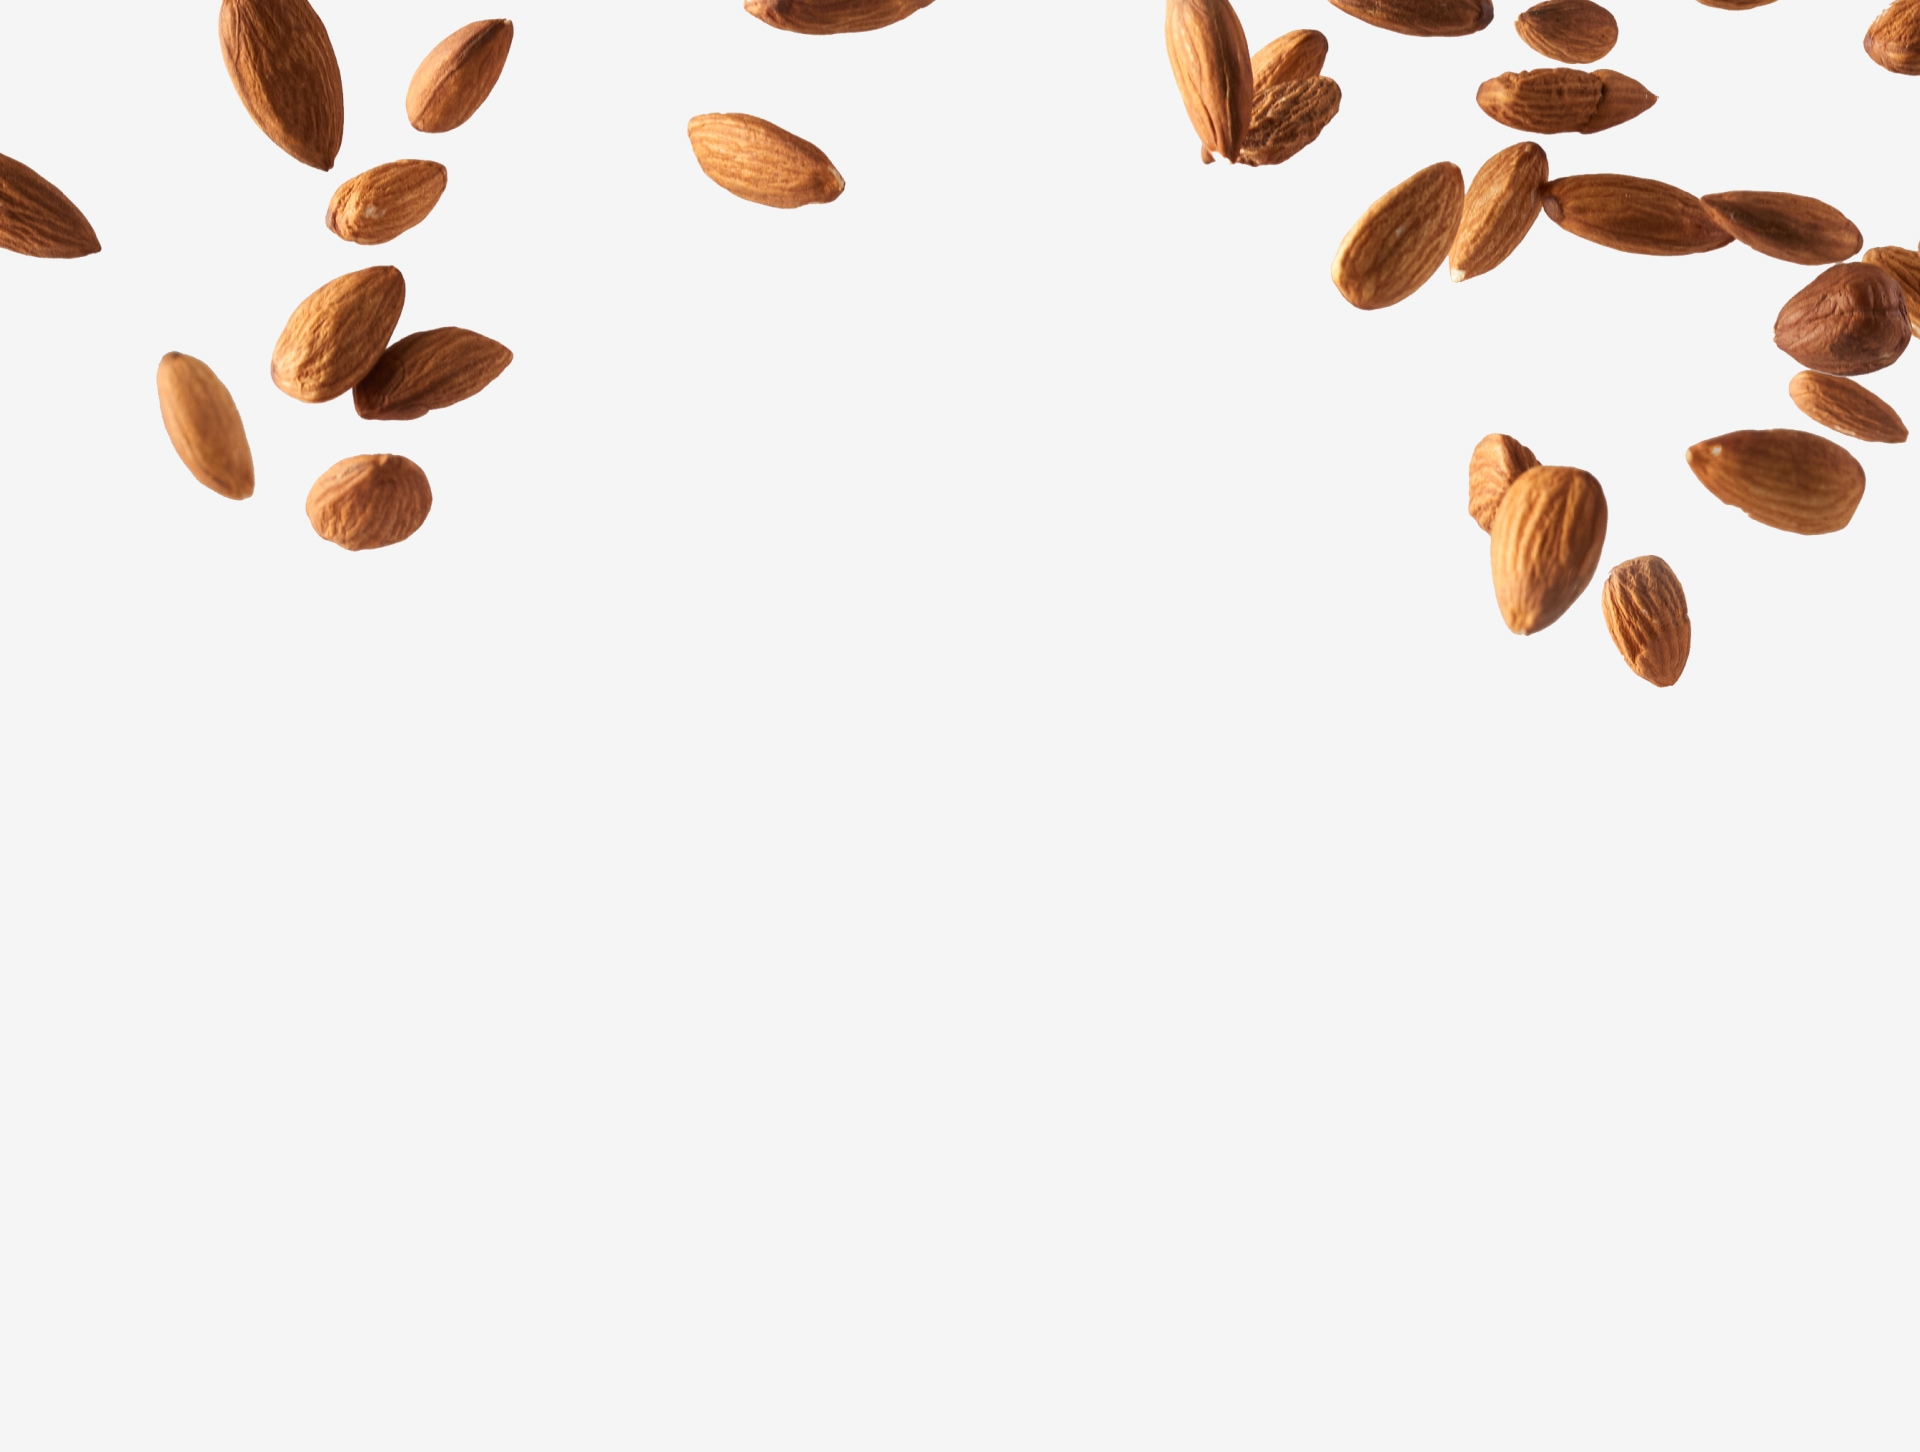 Whole Almonds falling - Leading almond ingredient supplier